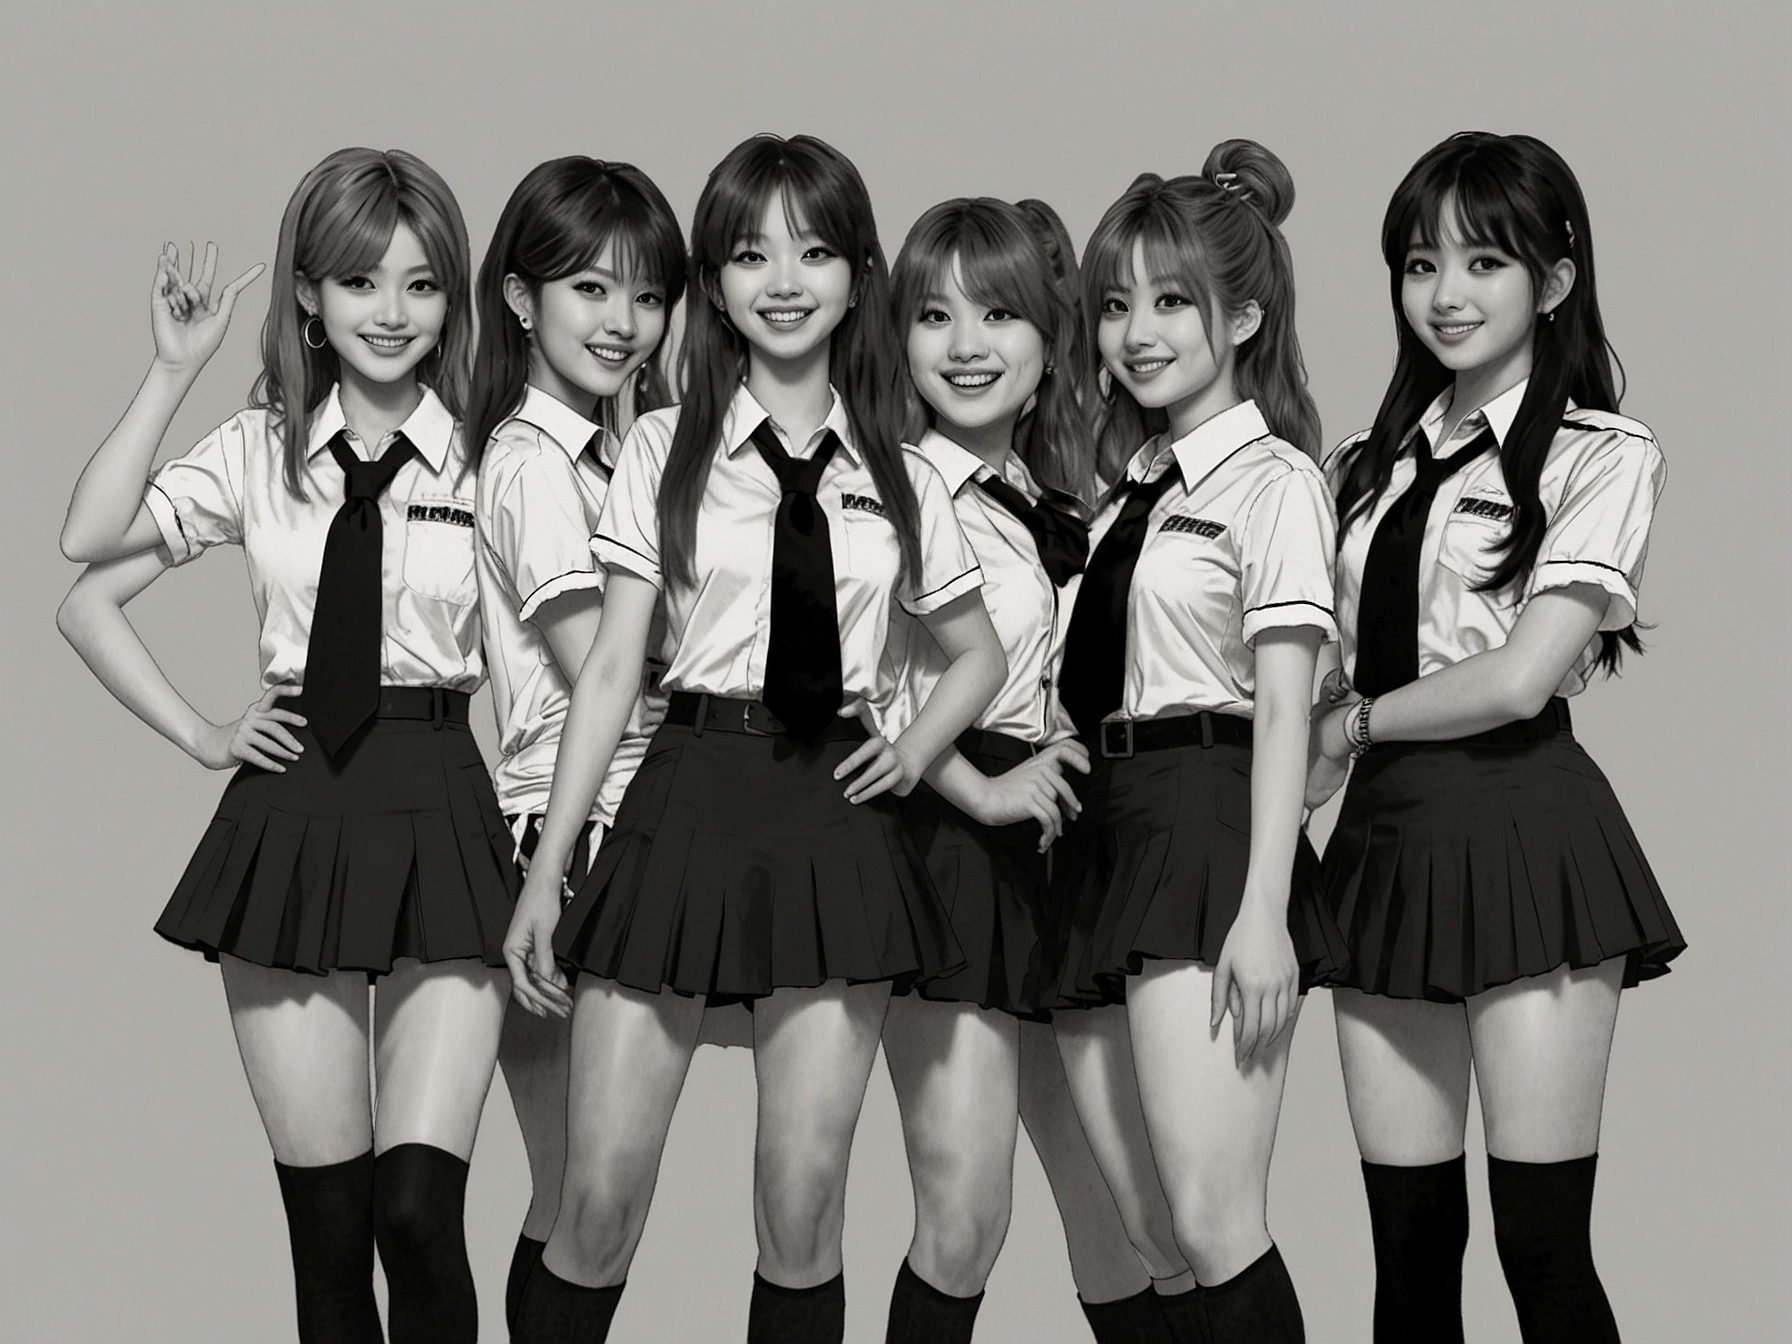 Momo Hirai, dressed in one of her iconic outfits, poses confidently with her fellow Twice members during their early years, showcasing their camaraderie and the group's dynamic energy.